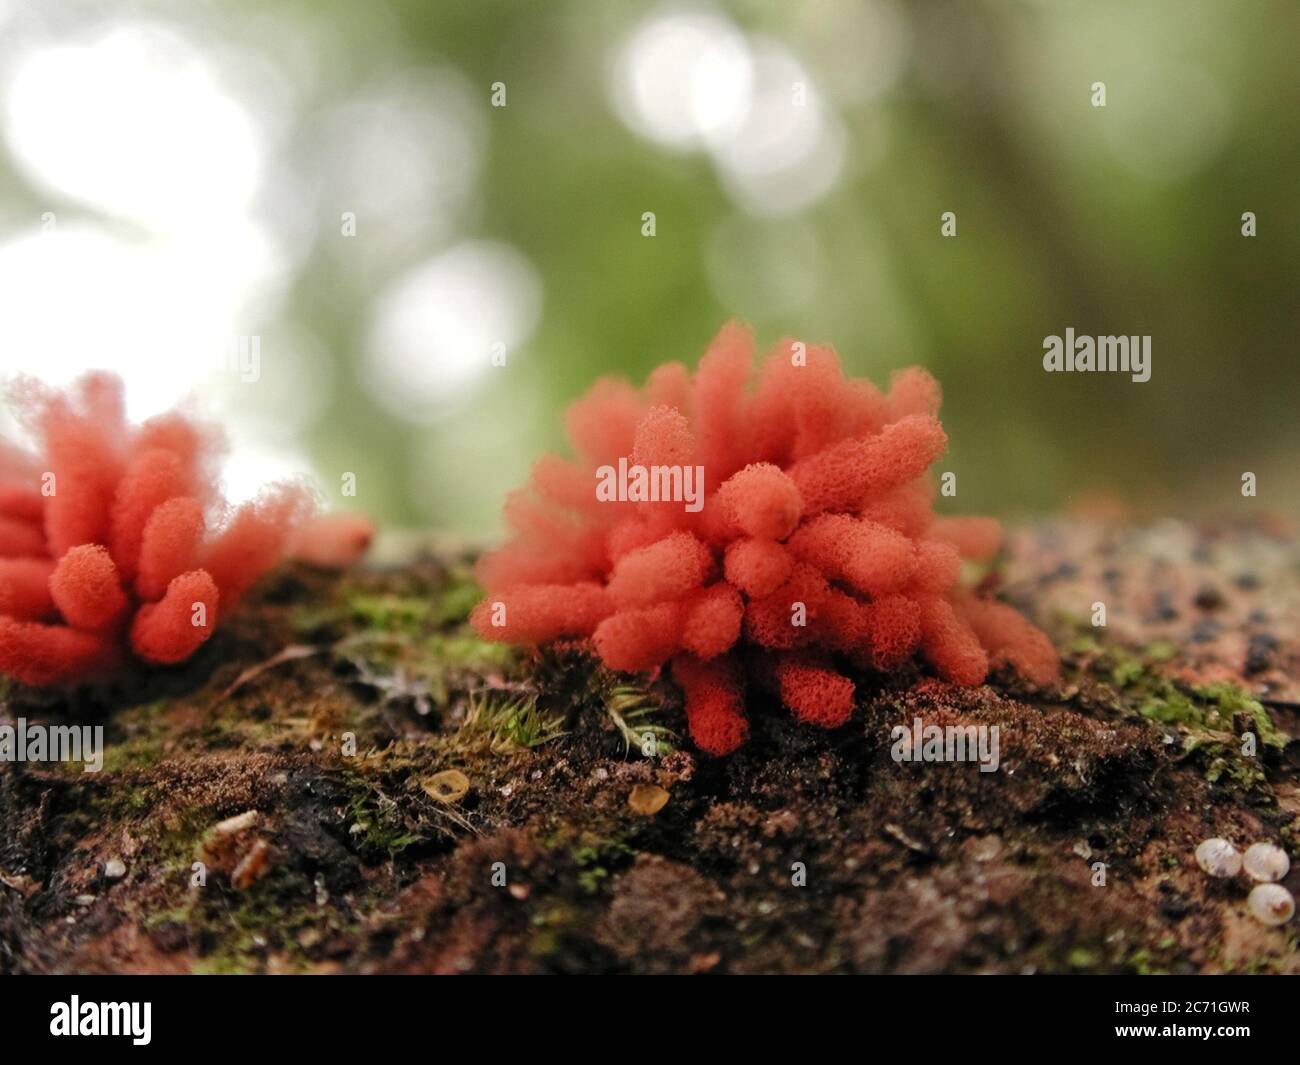 A form of fungi found in natural settings around the world.  This one is found in a forested area of North Central Florida. Stock Photo